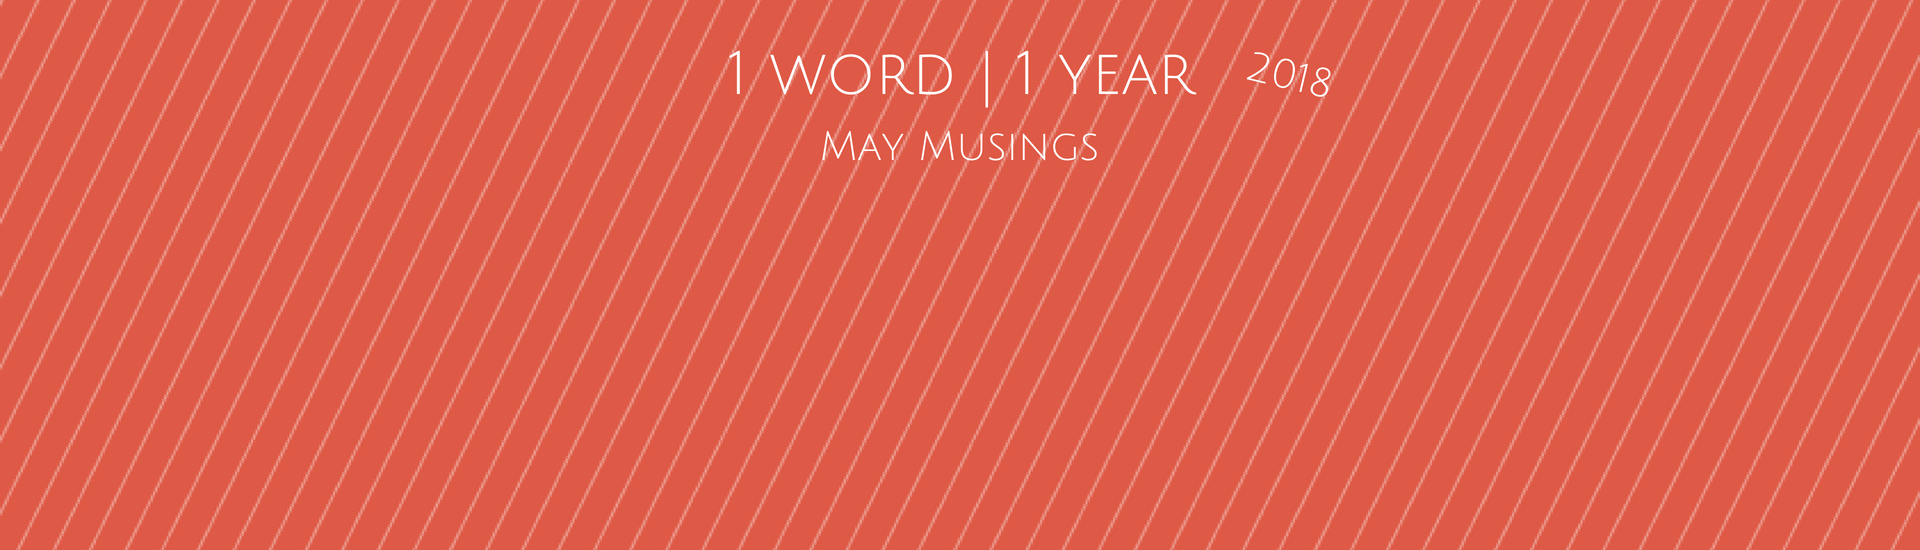 1 Word for 1 Year May 2018 Header